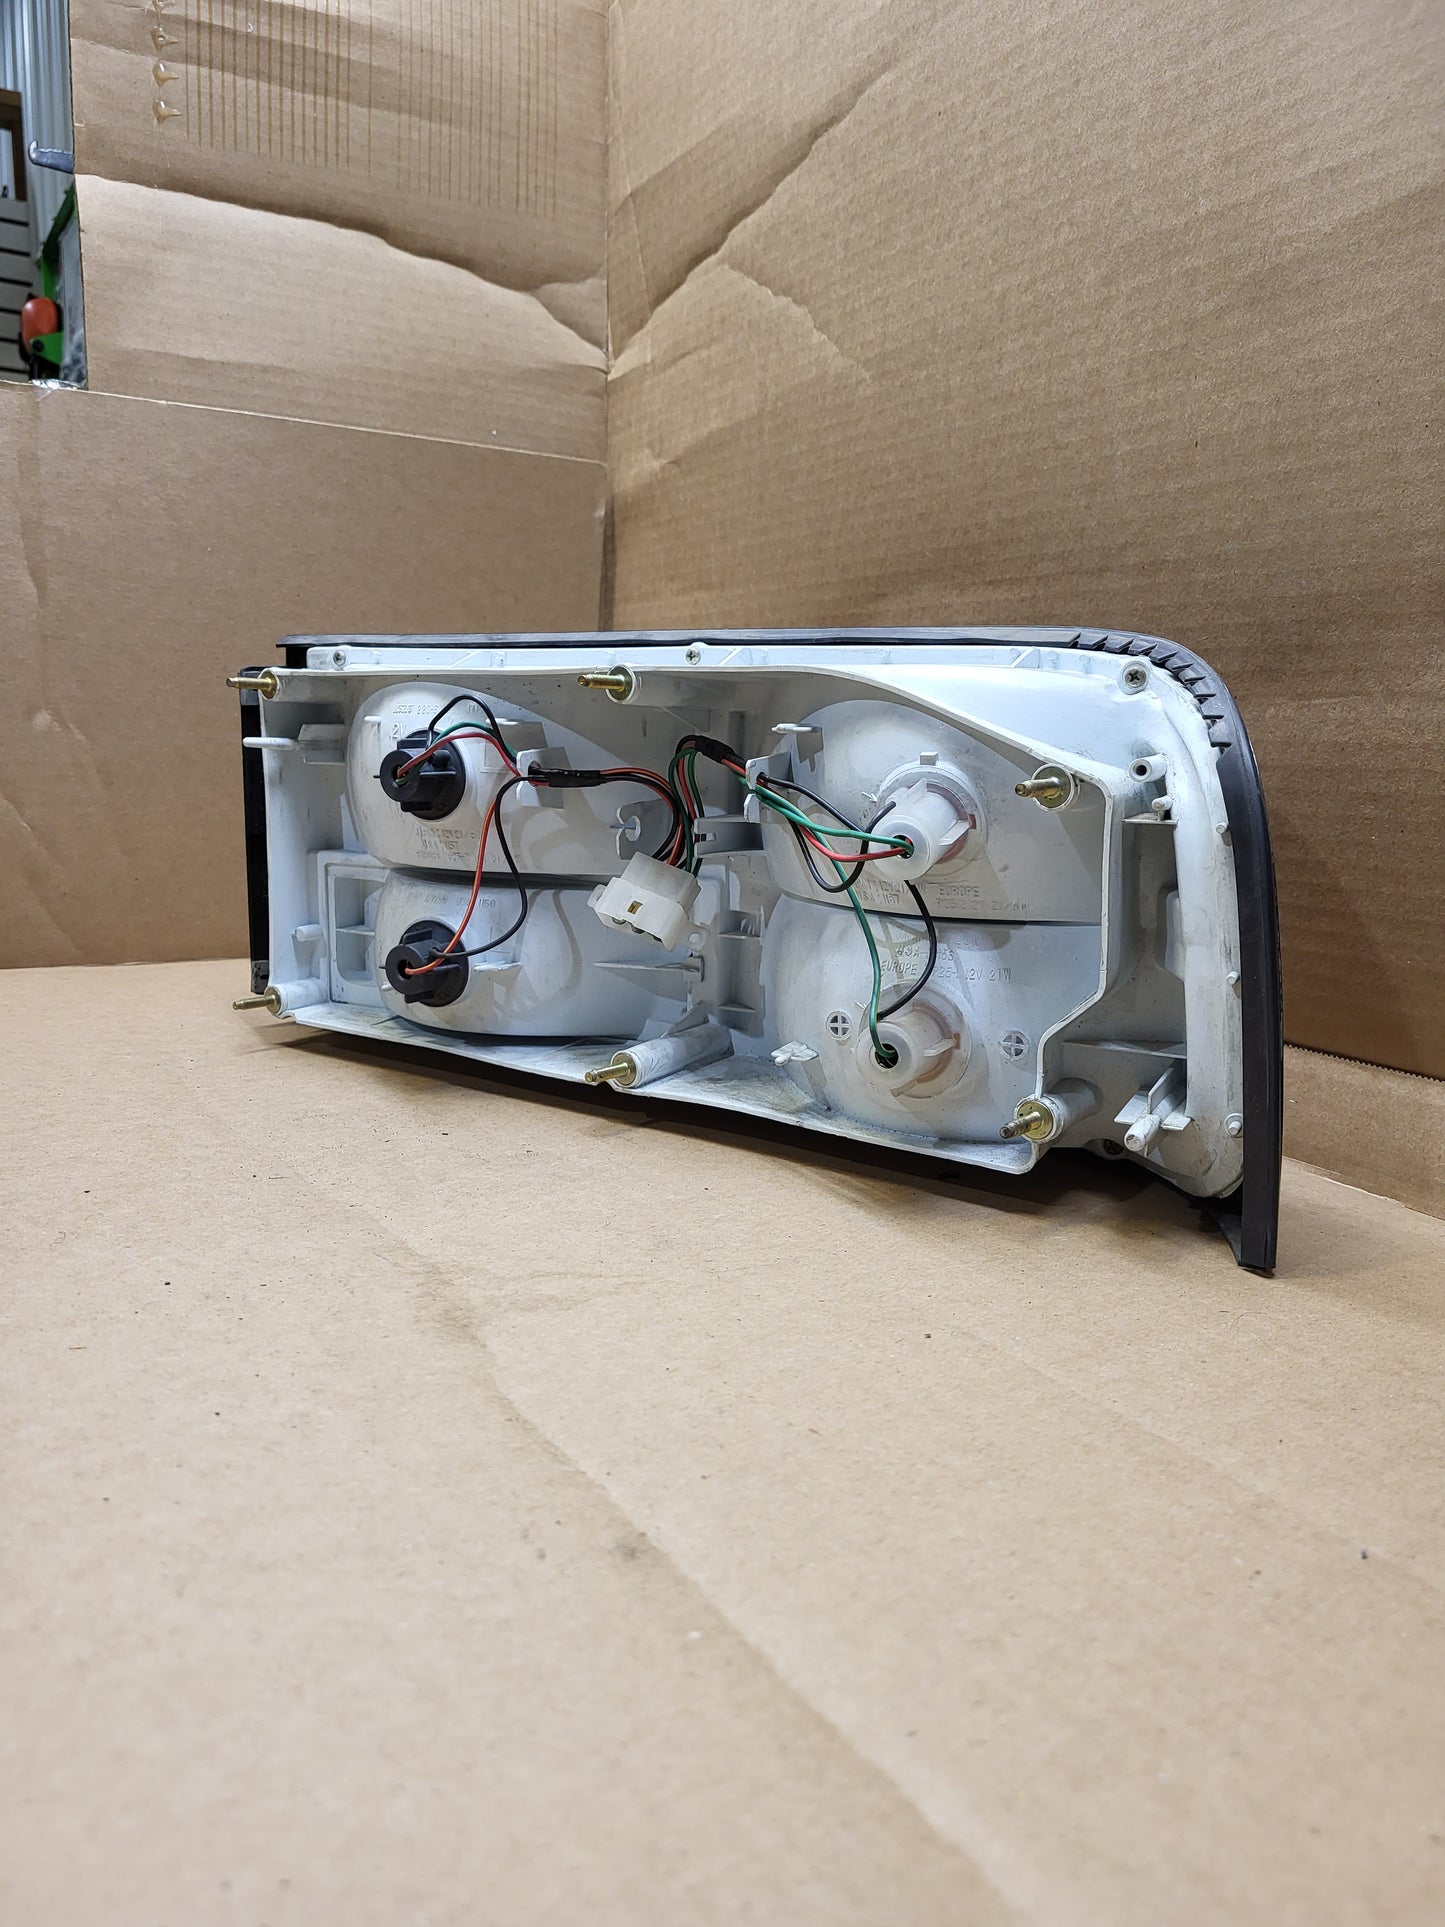 1988 Mazda RX7 FC Convertible Left Tail Light